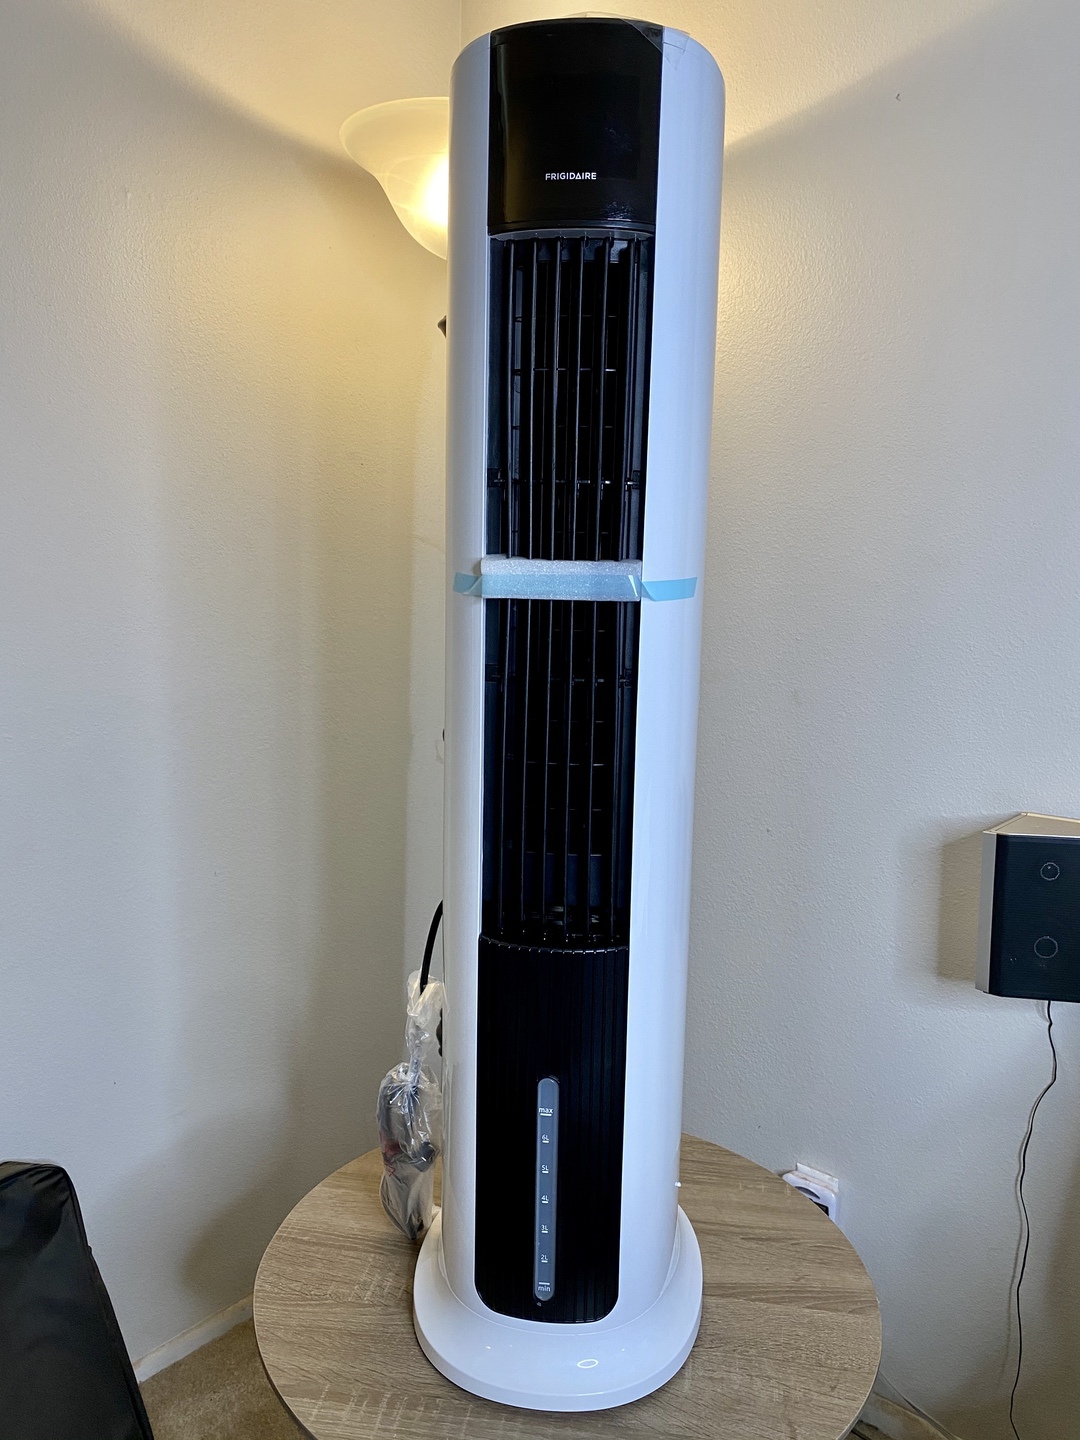 NewAir Frigidaire 2-in-1 Evaporative Cooler and Tower Fan